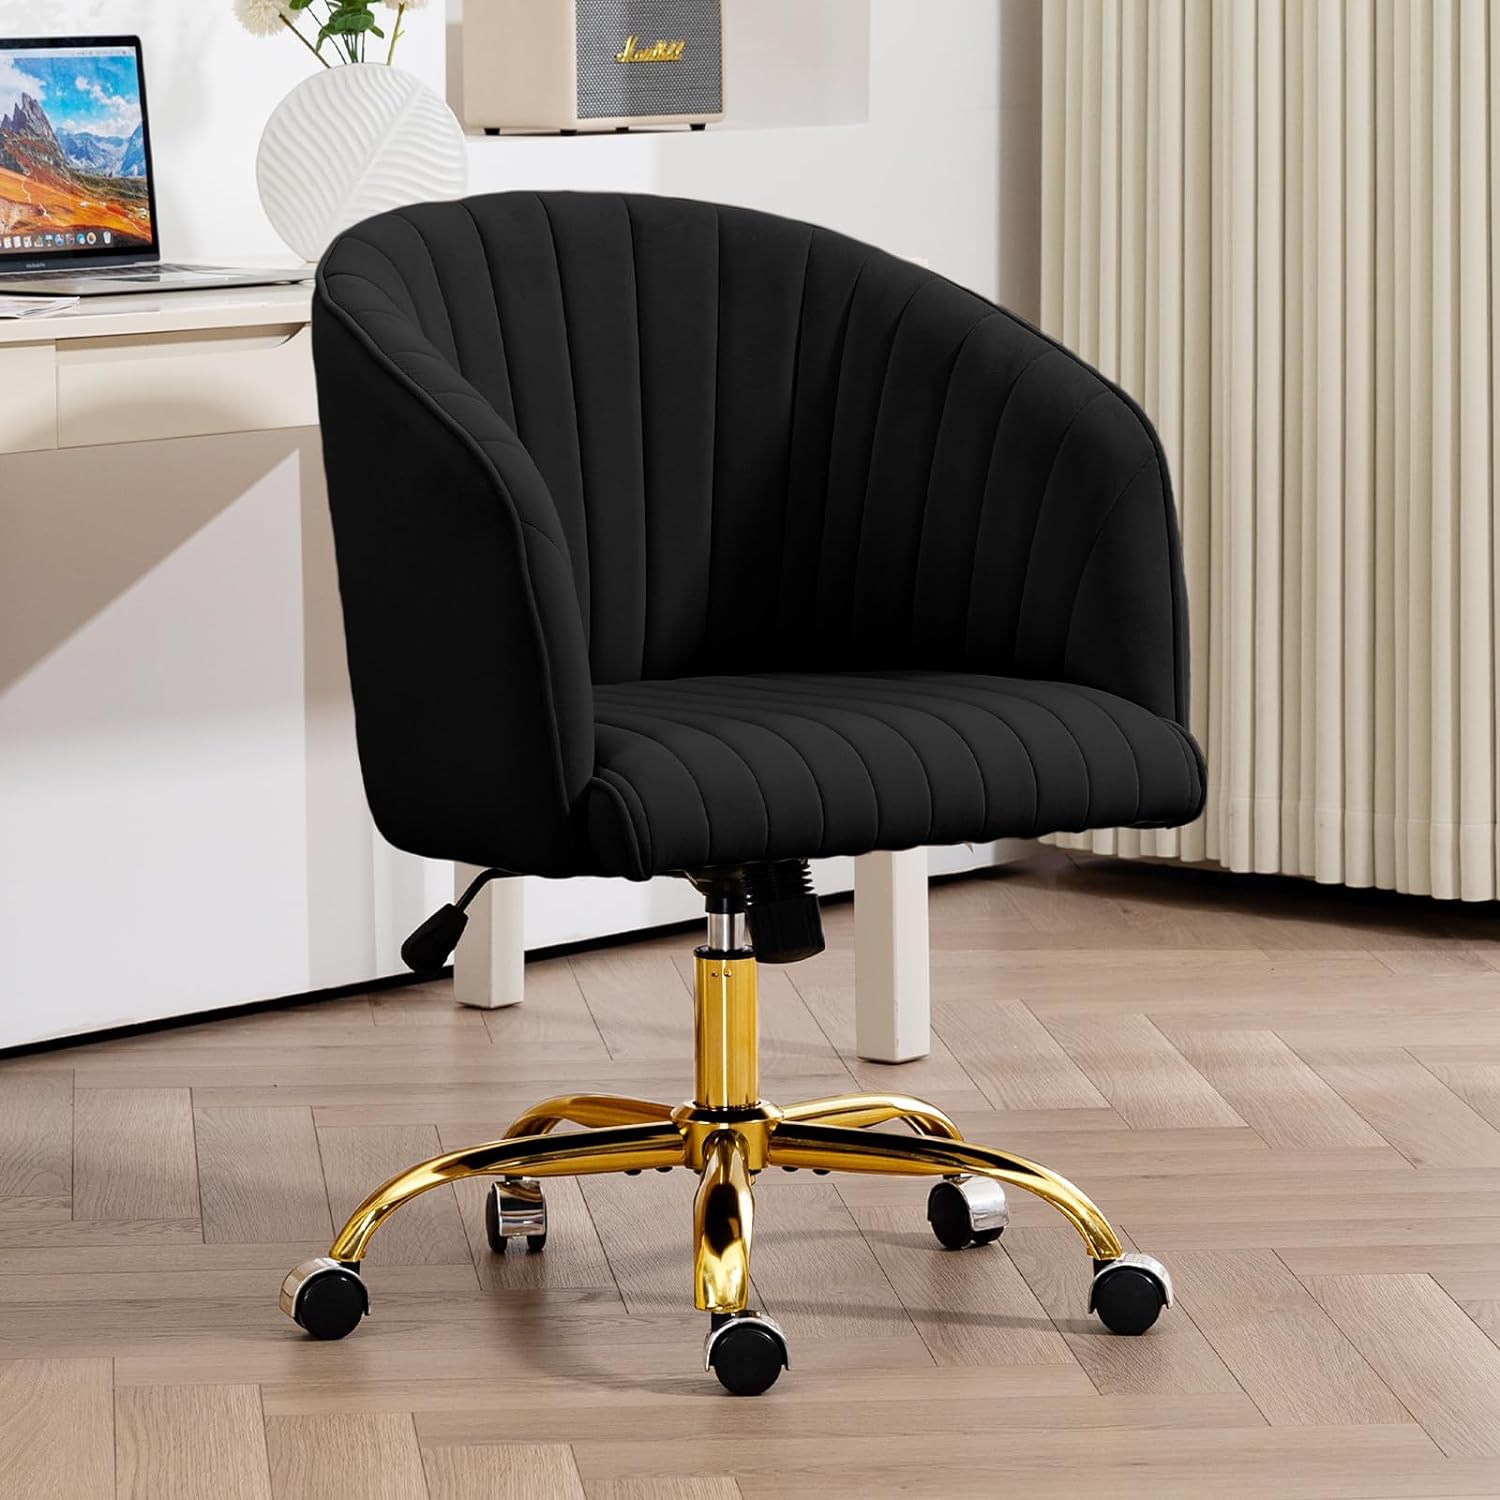 Comfy Velvet Office Chair, Modern Height Adjustable Home Office Desk Chair with Heavy Duty Gold Base, 360 Swivel Cute Vanity Chair Ergonomic Computer Task Chair for Home Office, Black